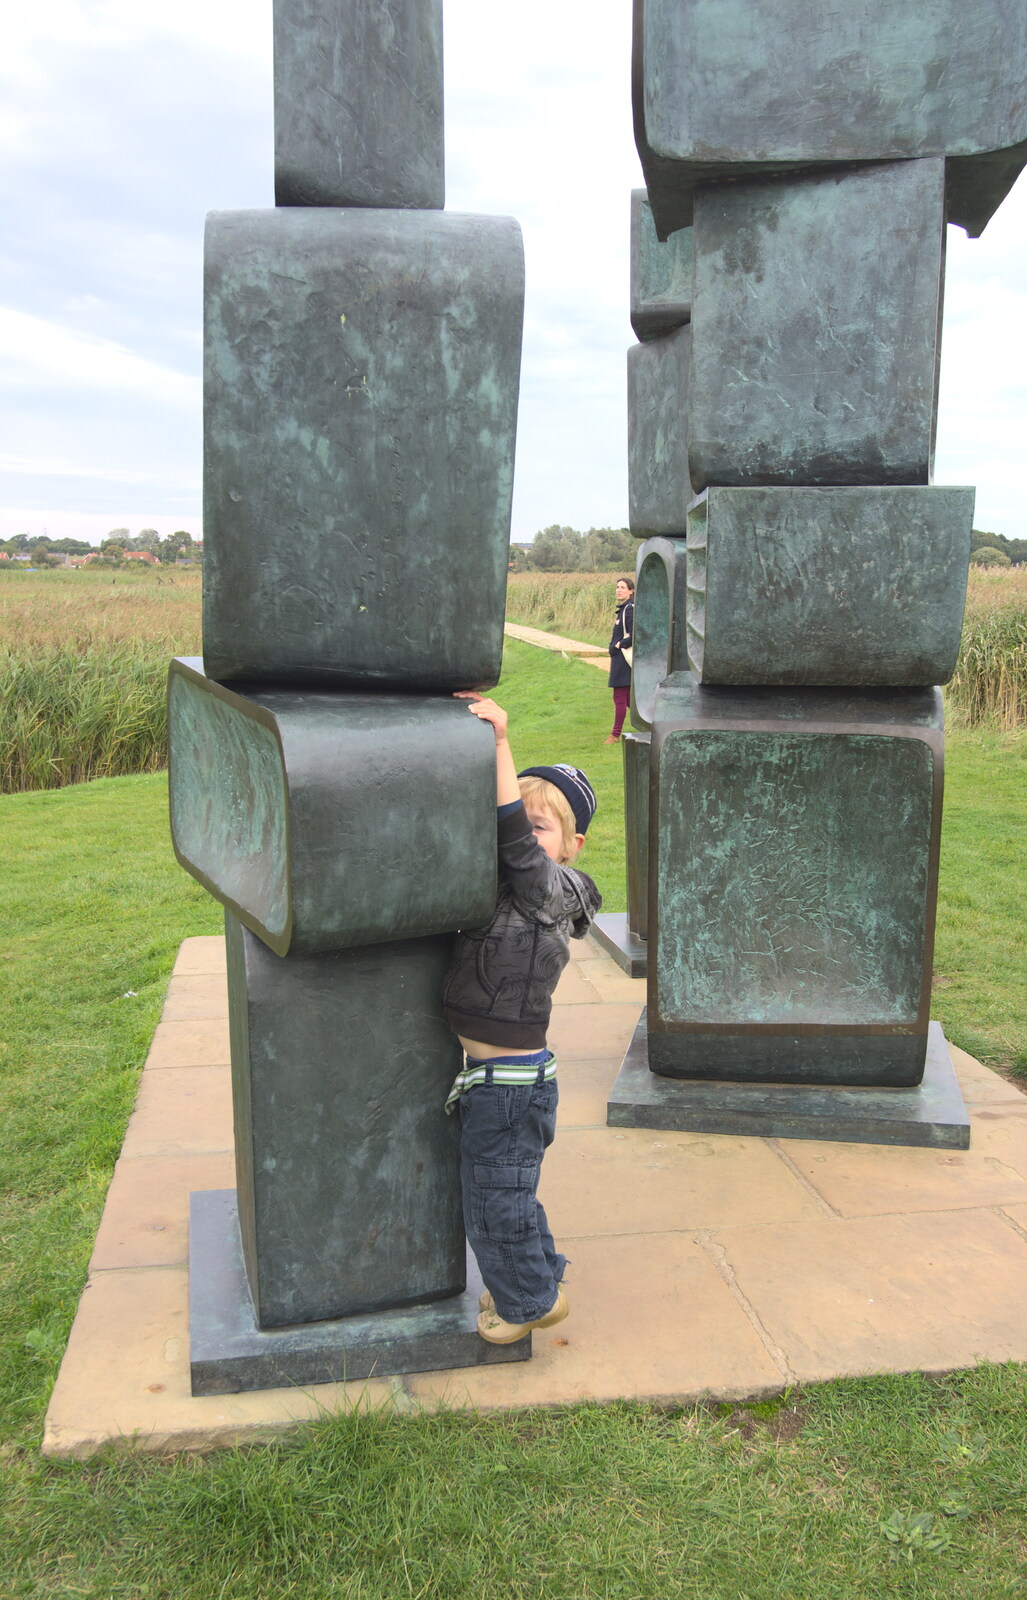 Fred climbs up on a Barbara Hepworth sculpture from The Aldeburgh Food Festival, Aldeburgh, Suffolk - 30th September 2012